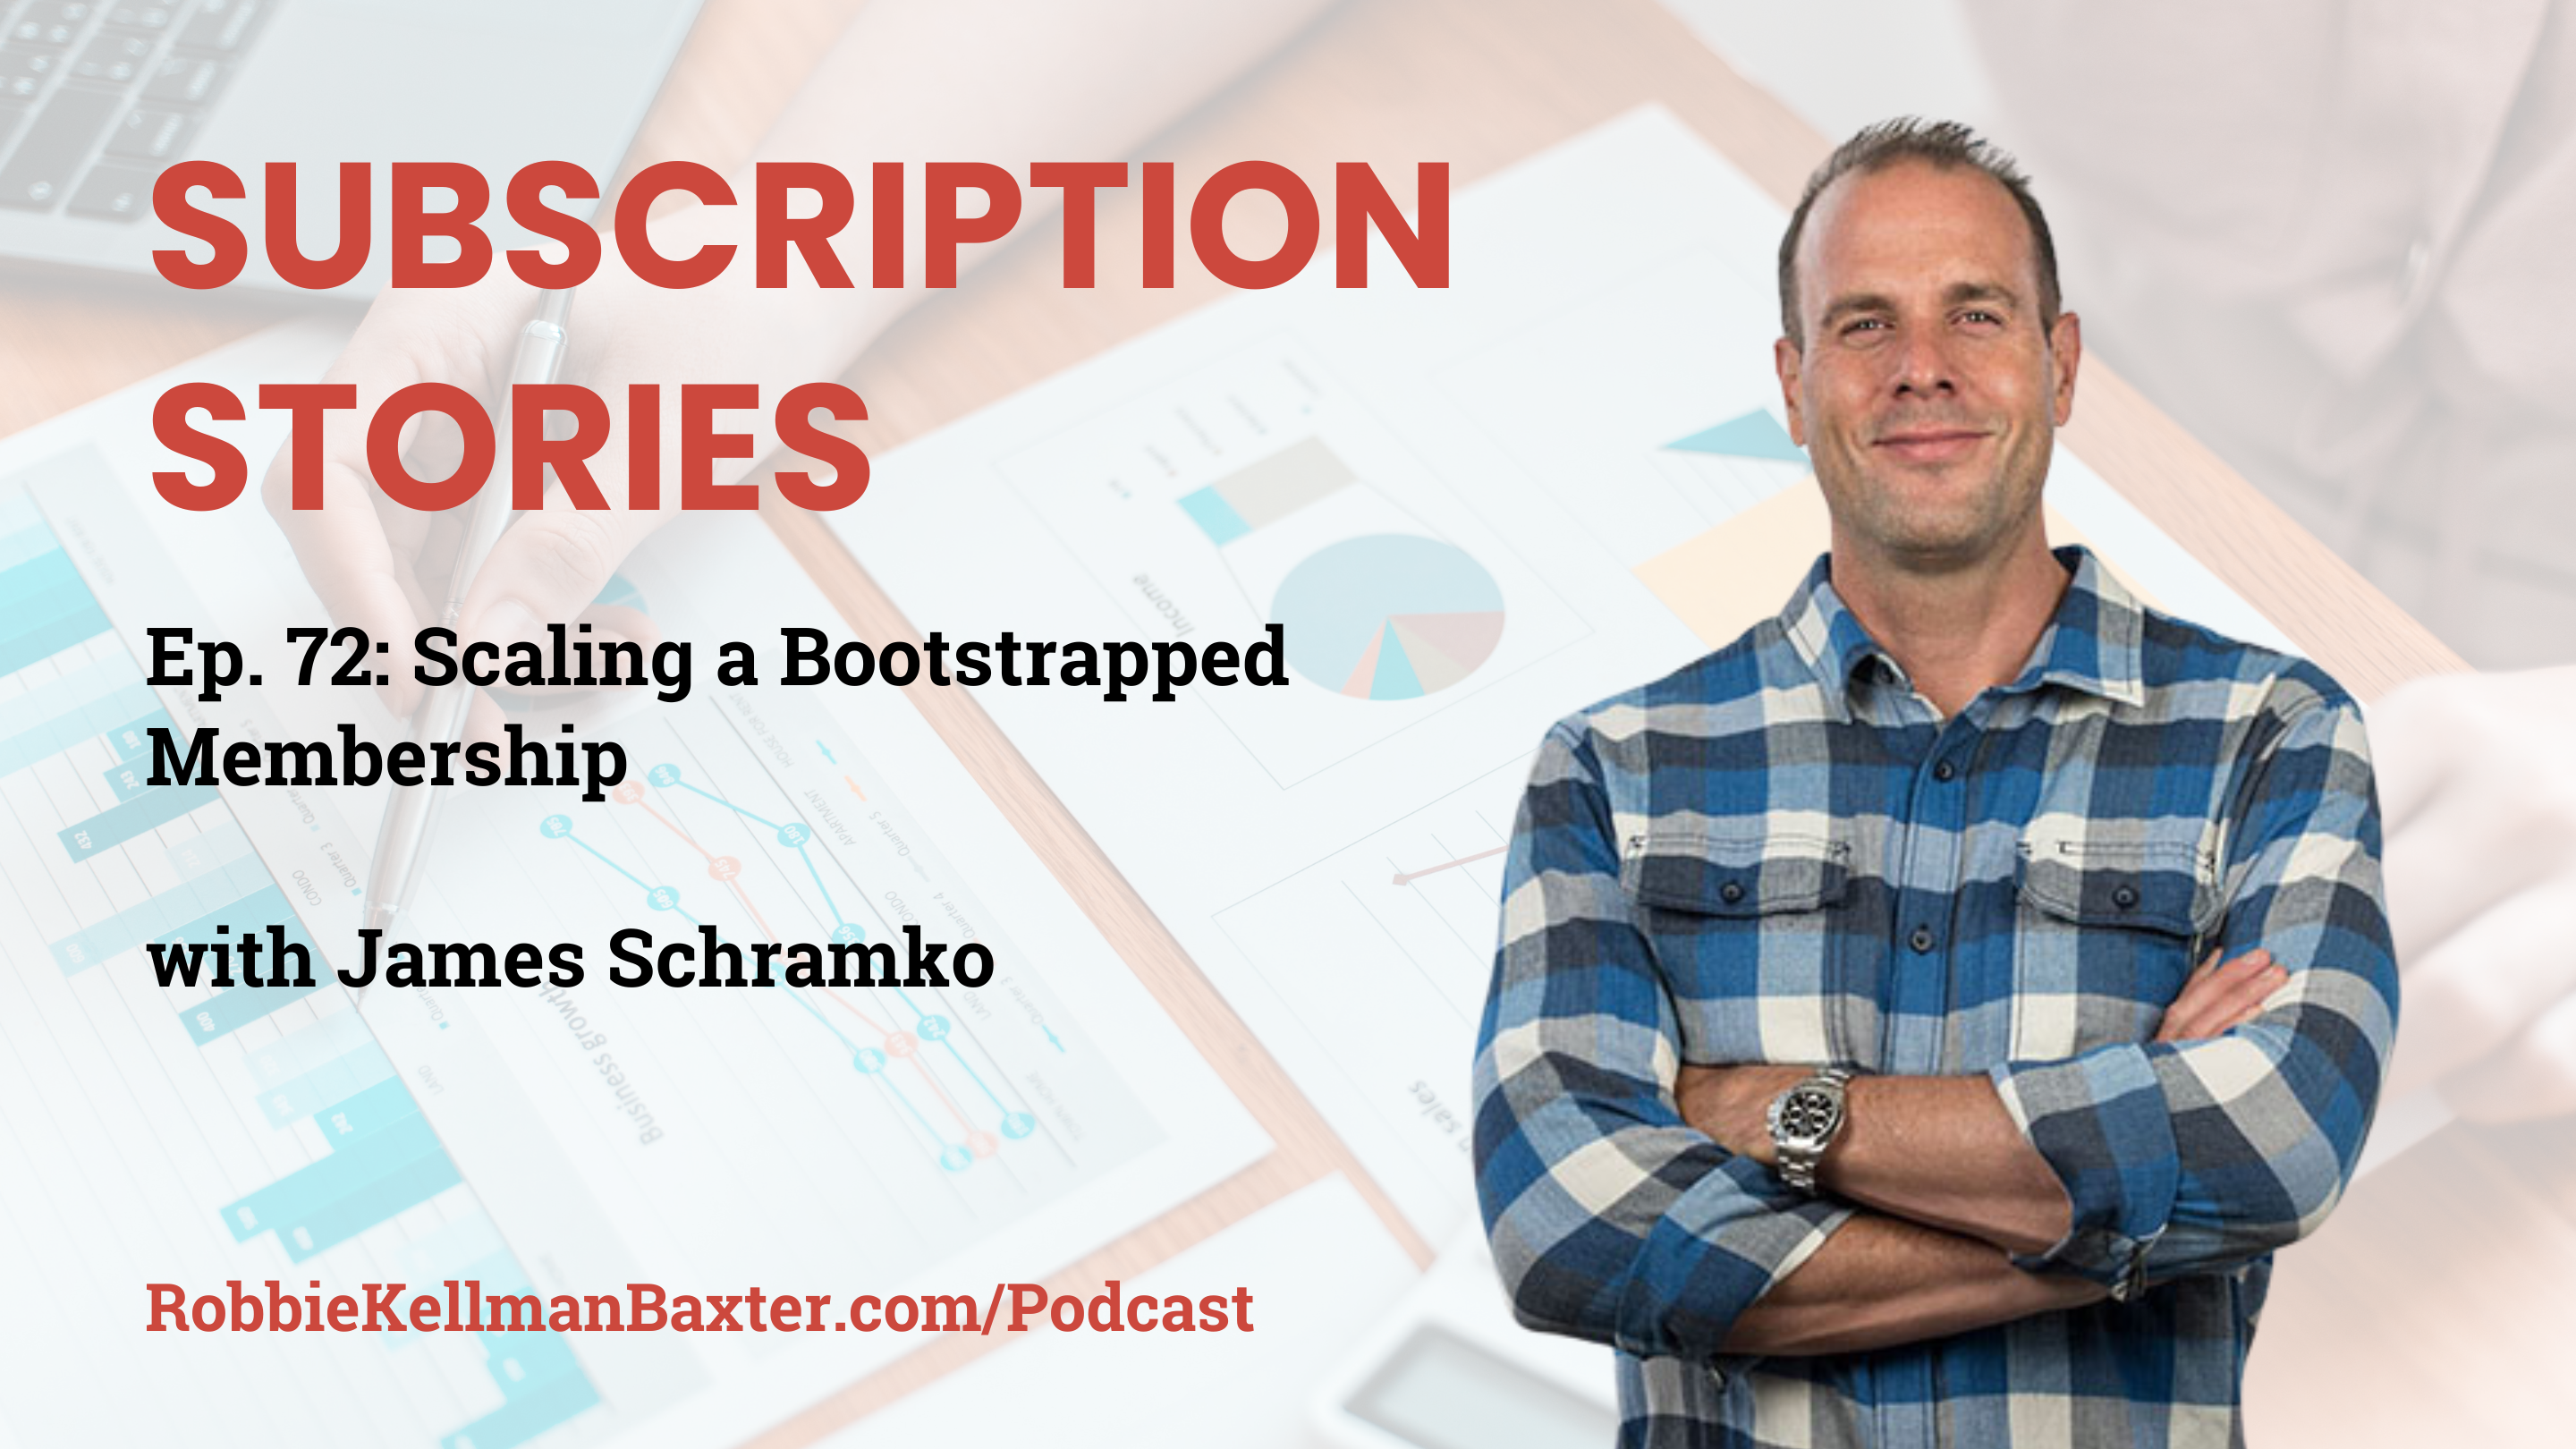 Scaling a Bootstrapped Membership with James Schramko